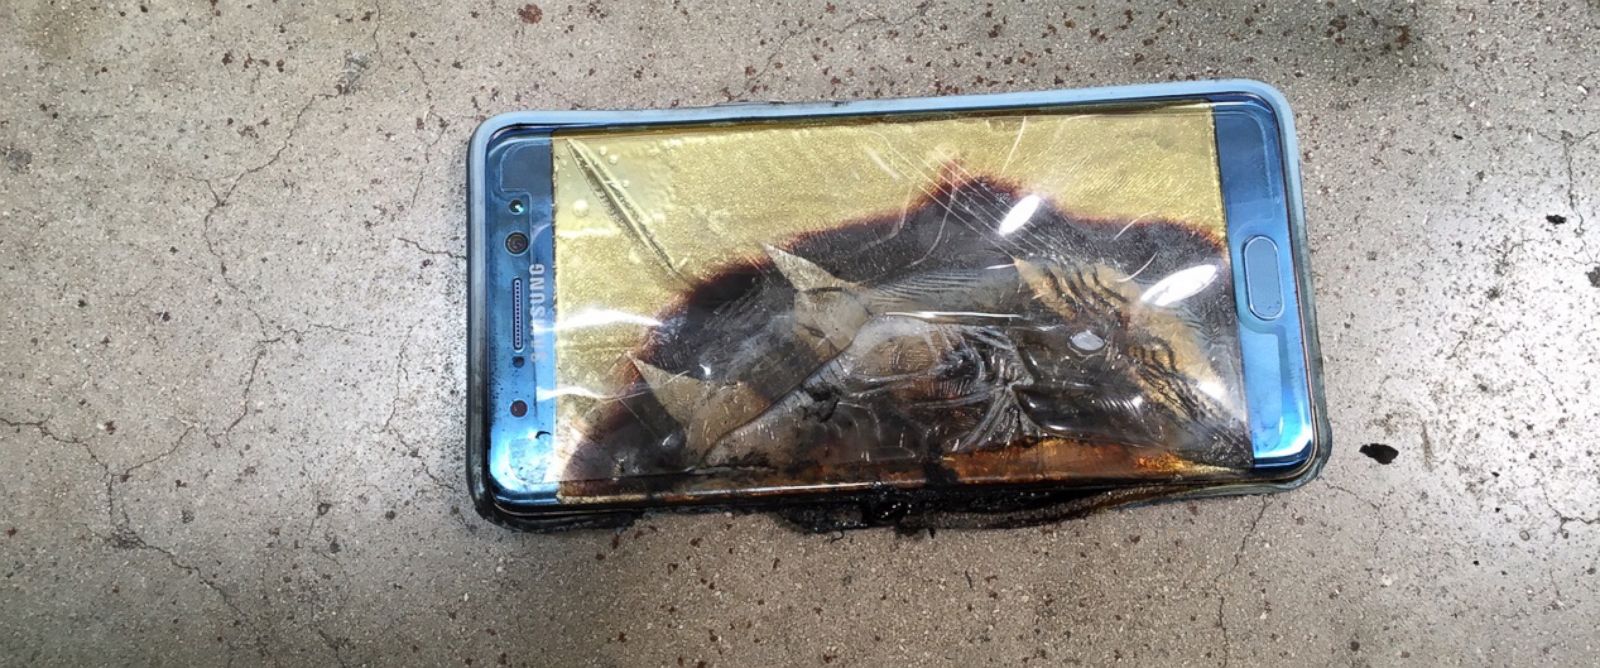 PHOTO: Jonathan Strobel has filed what is believed to be the first lawsuit to result from a battery defect affecting Samsung Note7 smartphones.